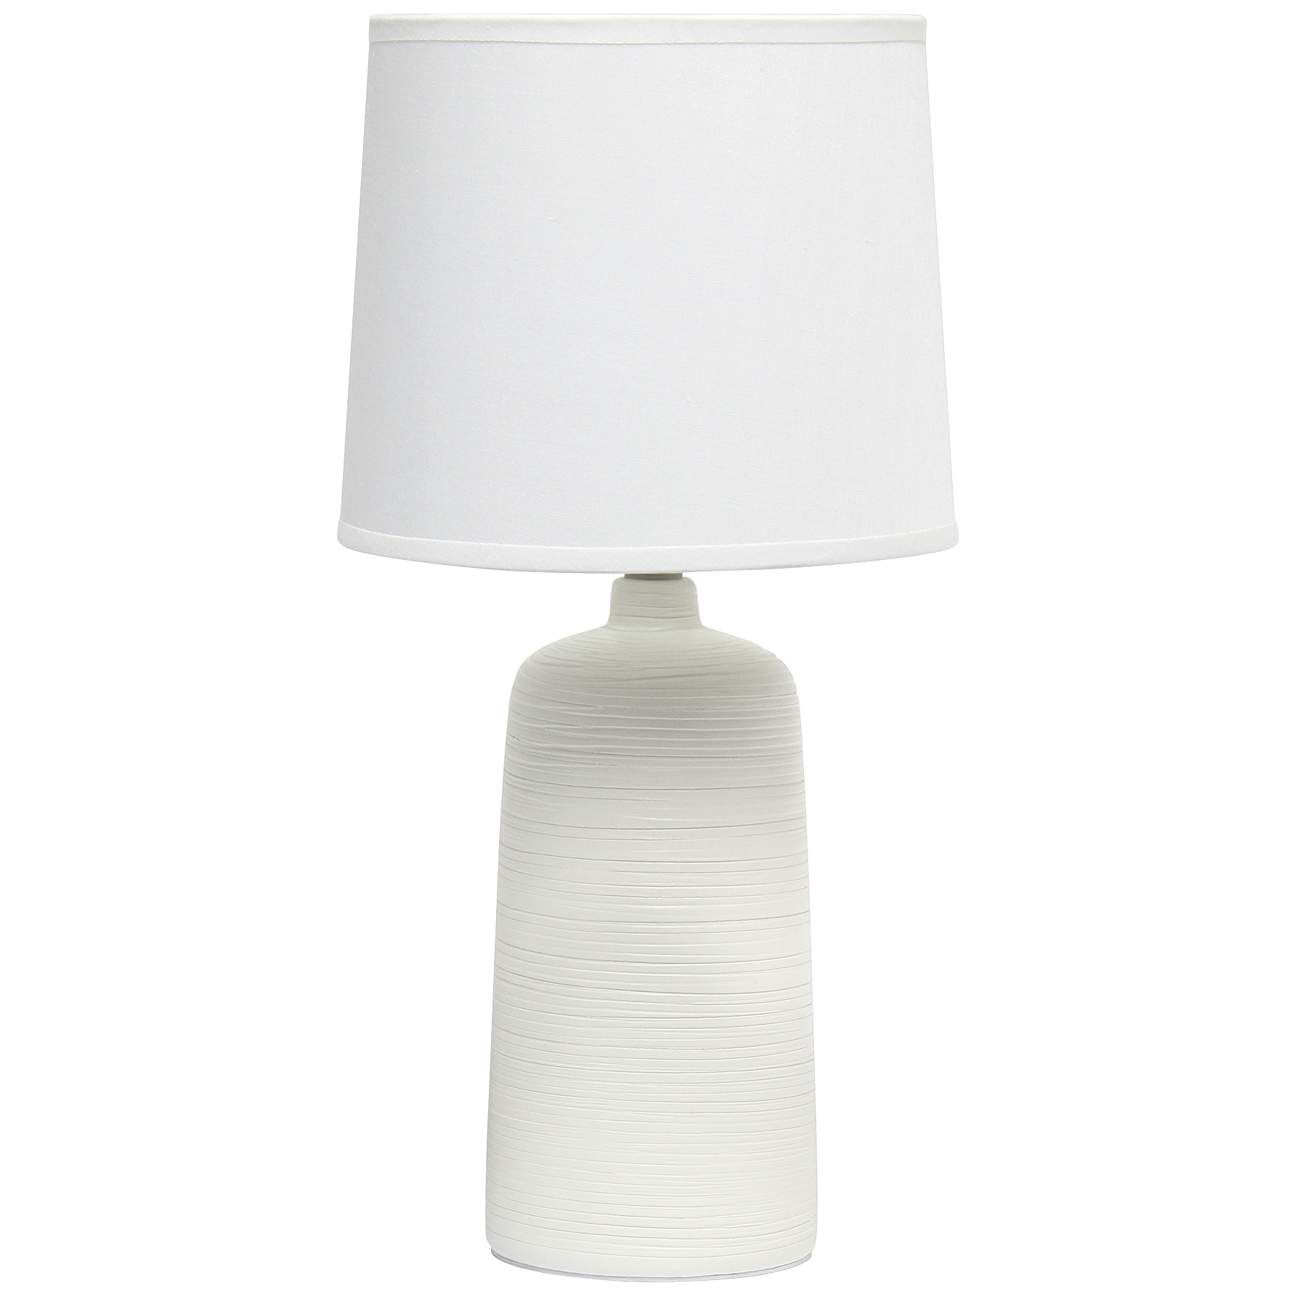 Simple Designs 15 3/4" High Off-White Accent Table Lamp | Lamps Plus